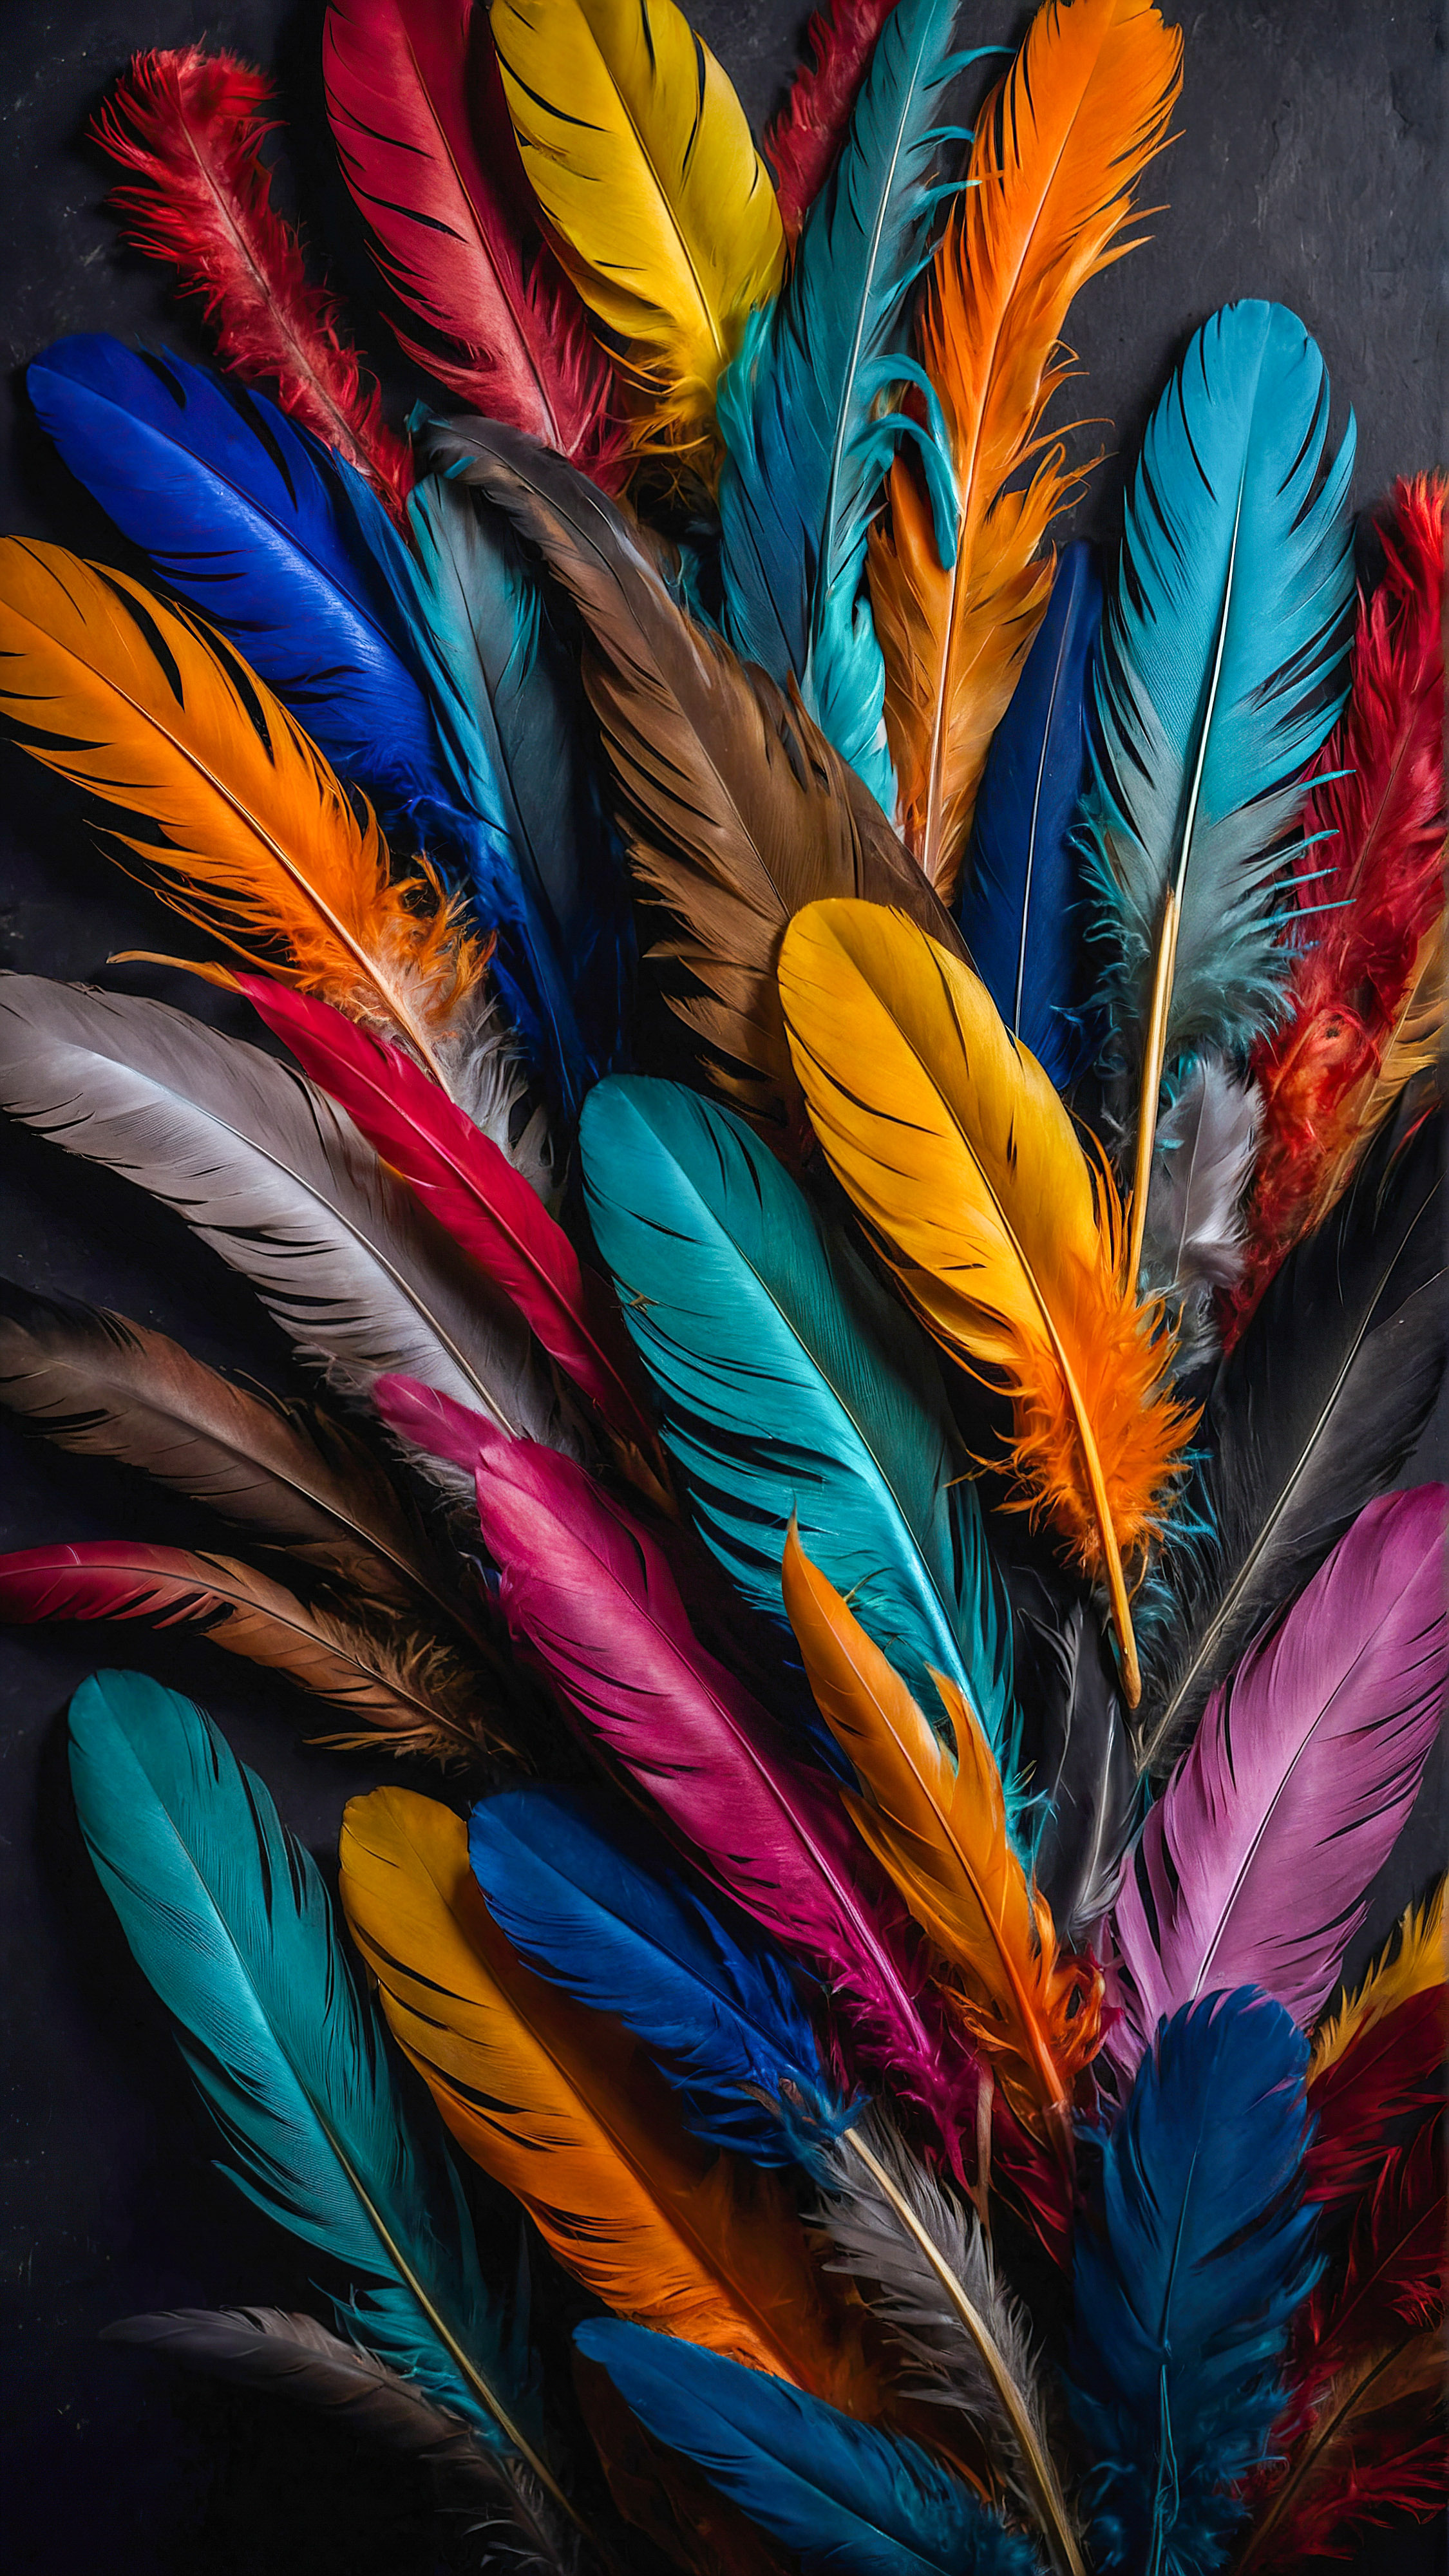 Experience the soothing effect of a pastel aesthetic iPhone wallpaper, presenting an abstract arrangement of colorful feathers against a dark background.